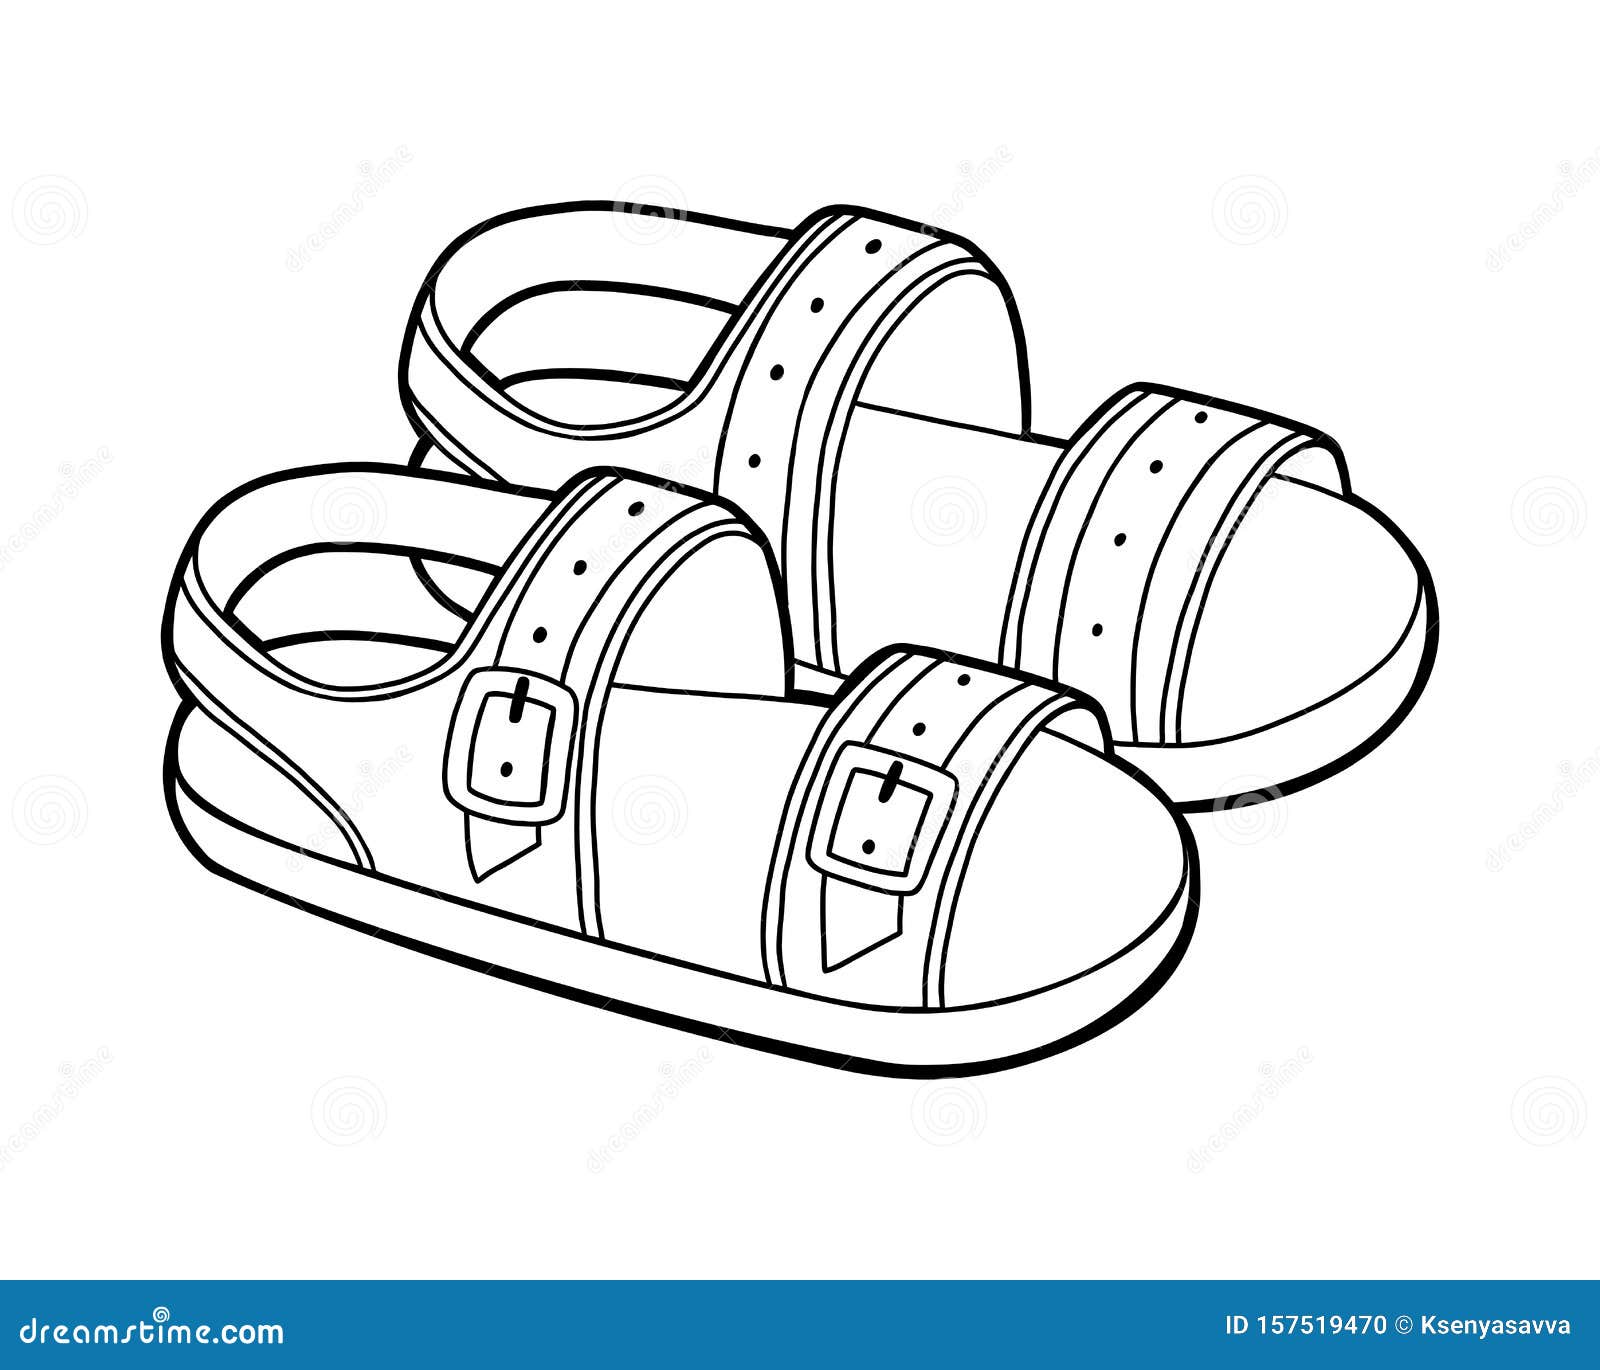 coloring book, cartoon shoe collection. mens sandals